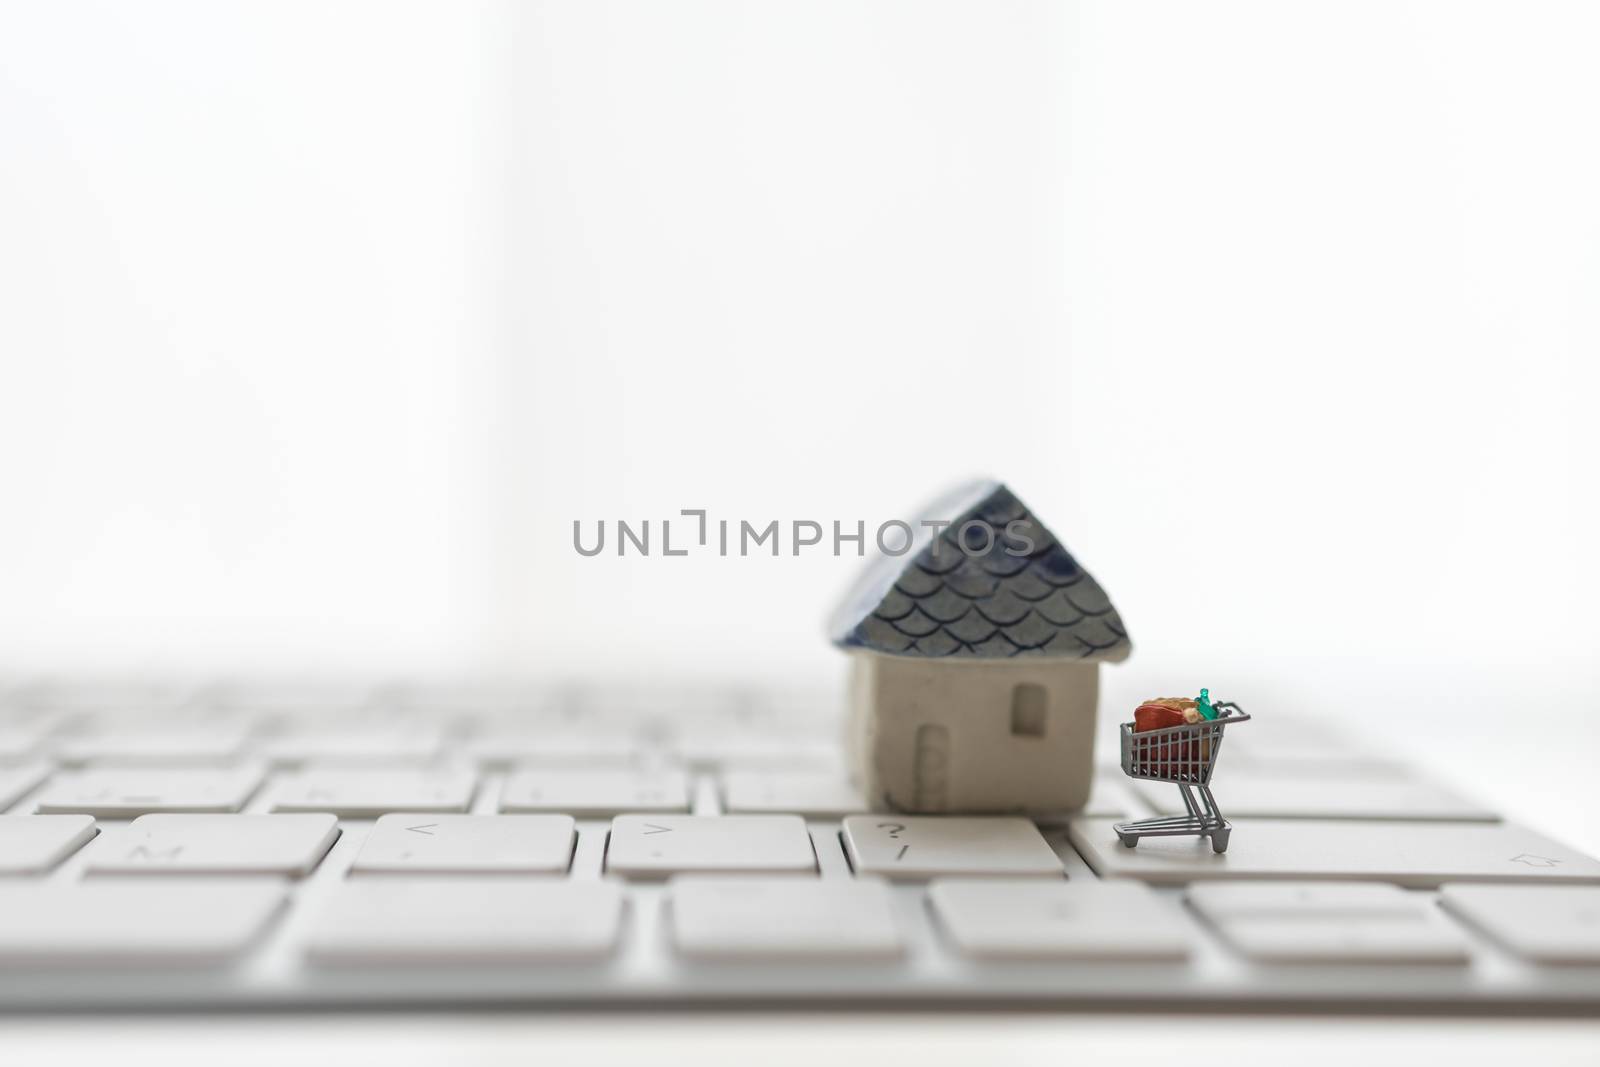 Online, E-Commerce and Technology concept.  Close up of miniature shopping cart / trolley on computer keyboard with mini house toy on white background.